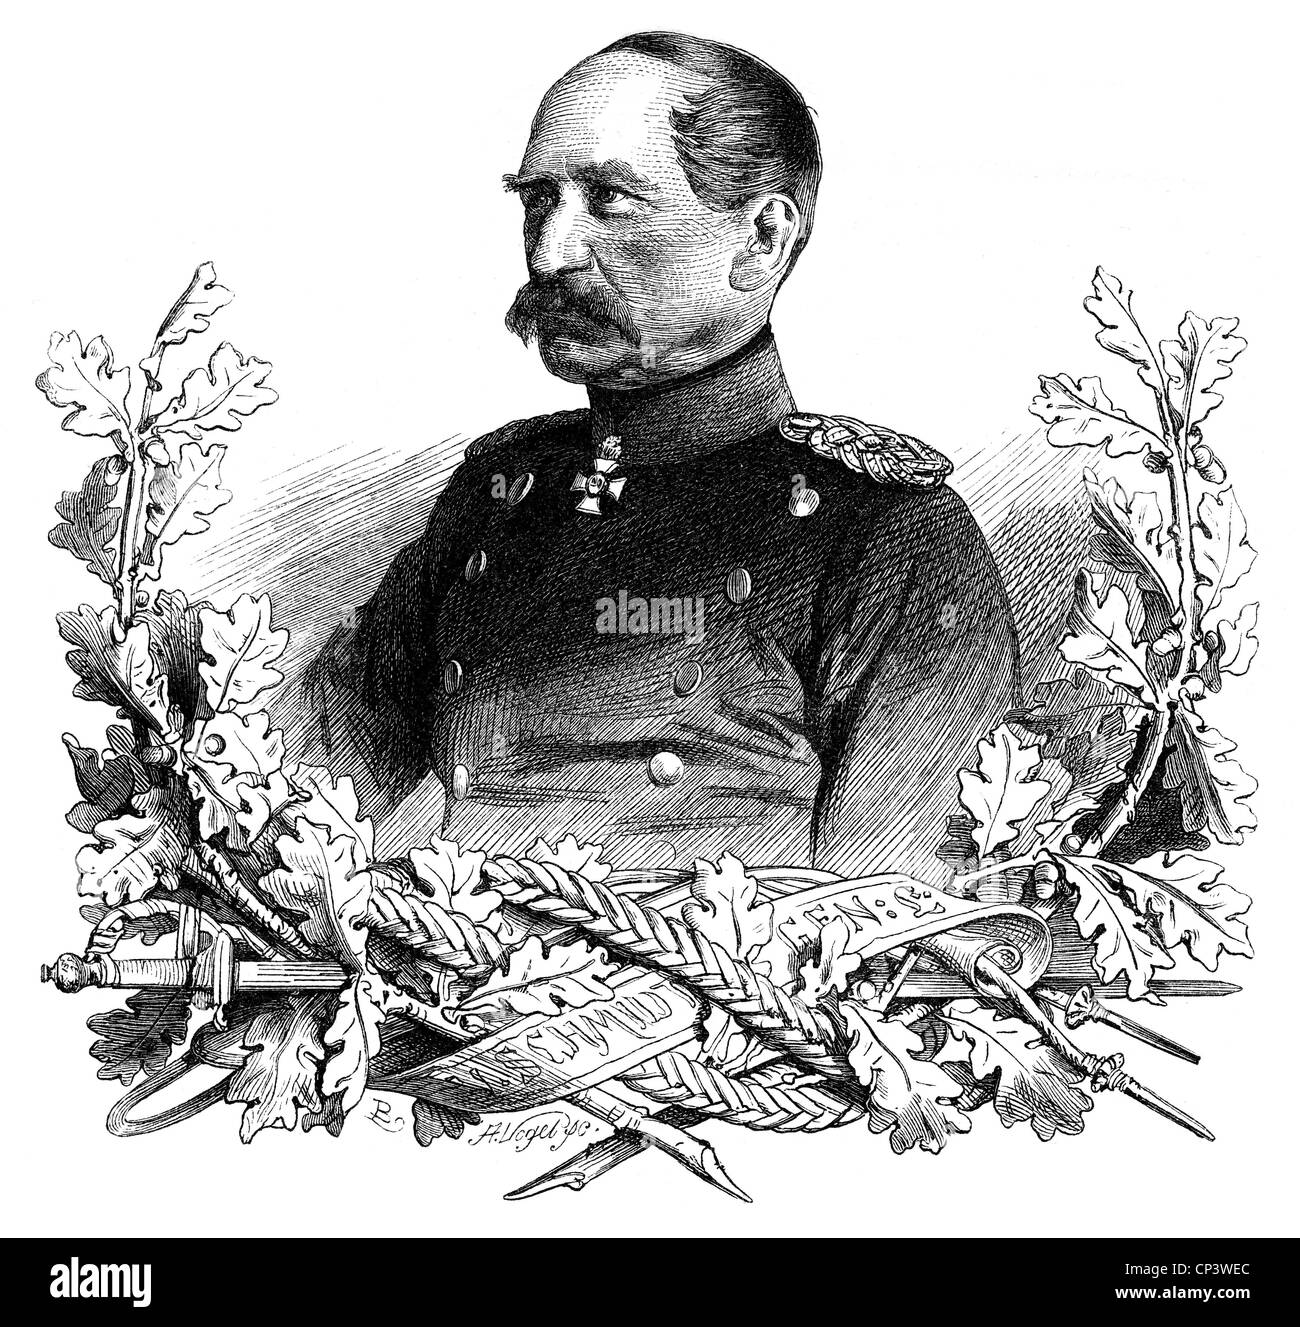 events, Austro-Prussian War 1866, persons, Lieutenant General von Schmidt, commanding general of the Prussian II Army Corps, portrait, wood engraving after drawing by Ludwig Burger, 'Der Deutsche Krieg von 1866' by Theodor Fontane, 1870/1871, Additional-Rights-Clearences-Not Available Stock Photo